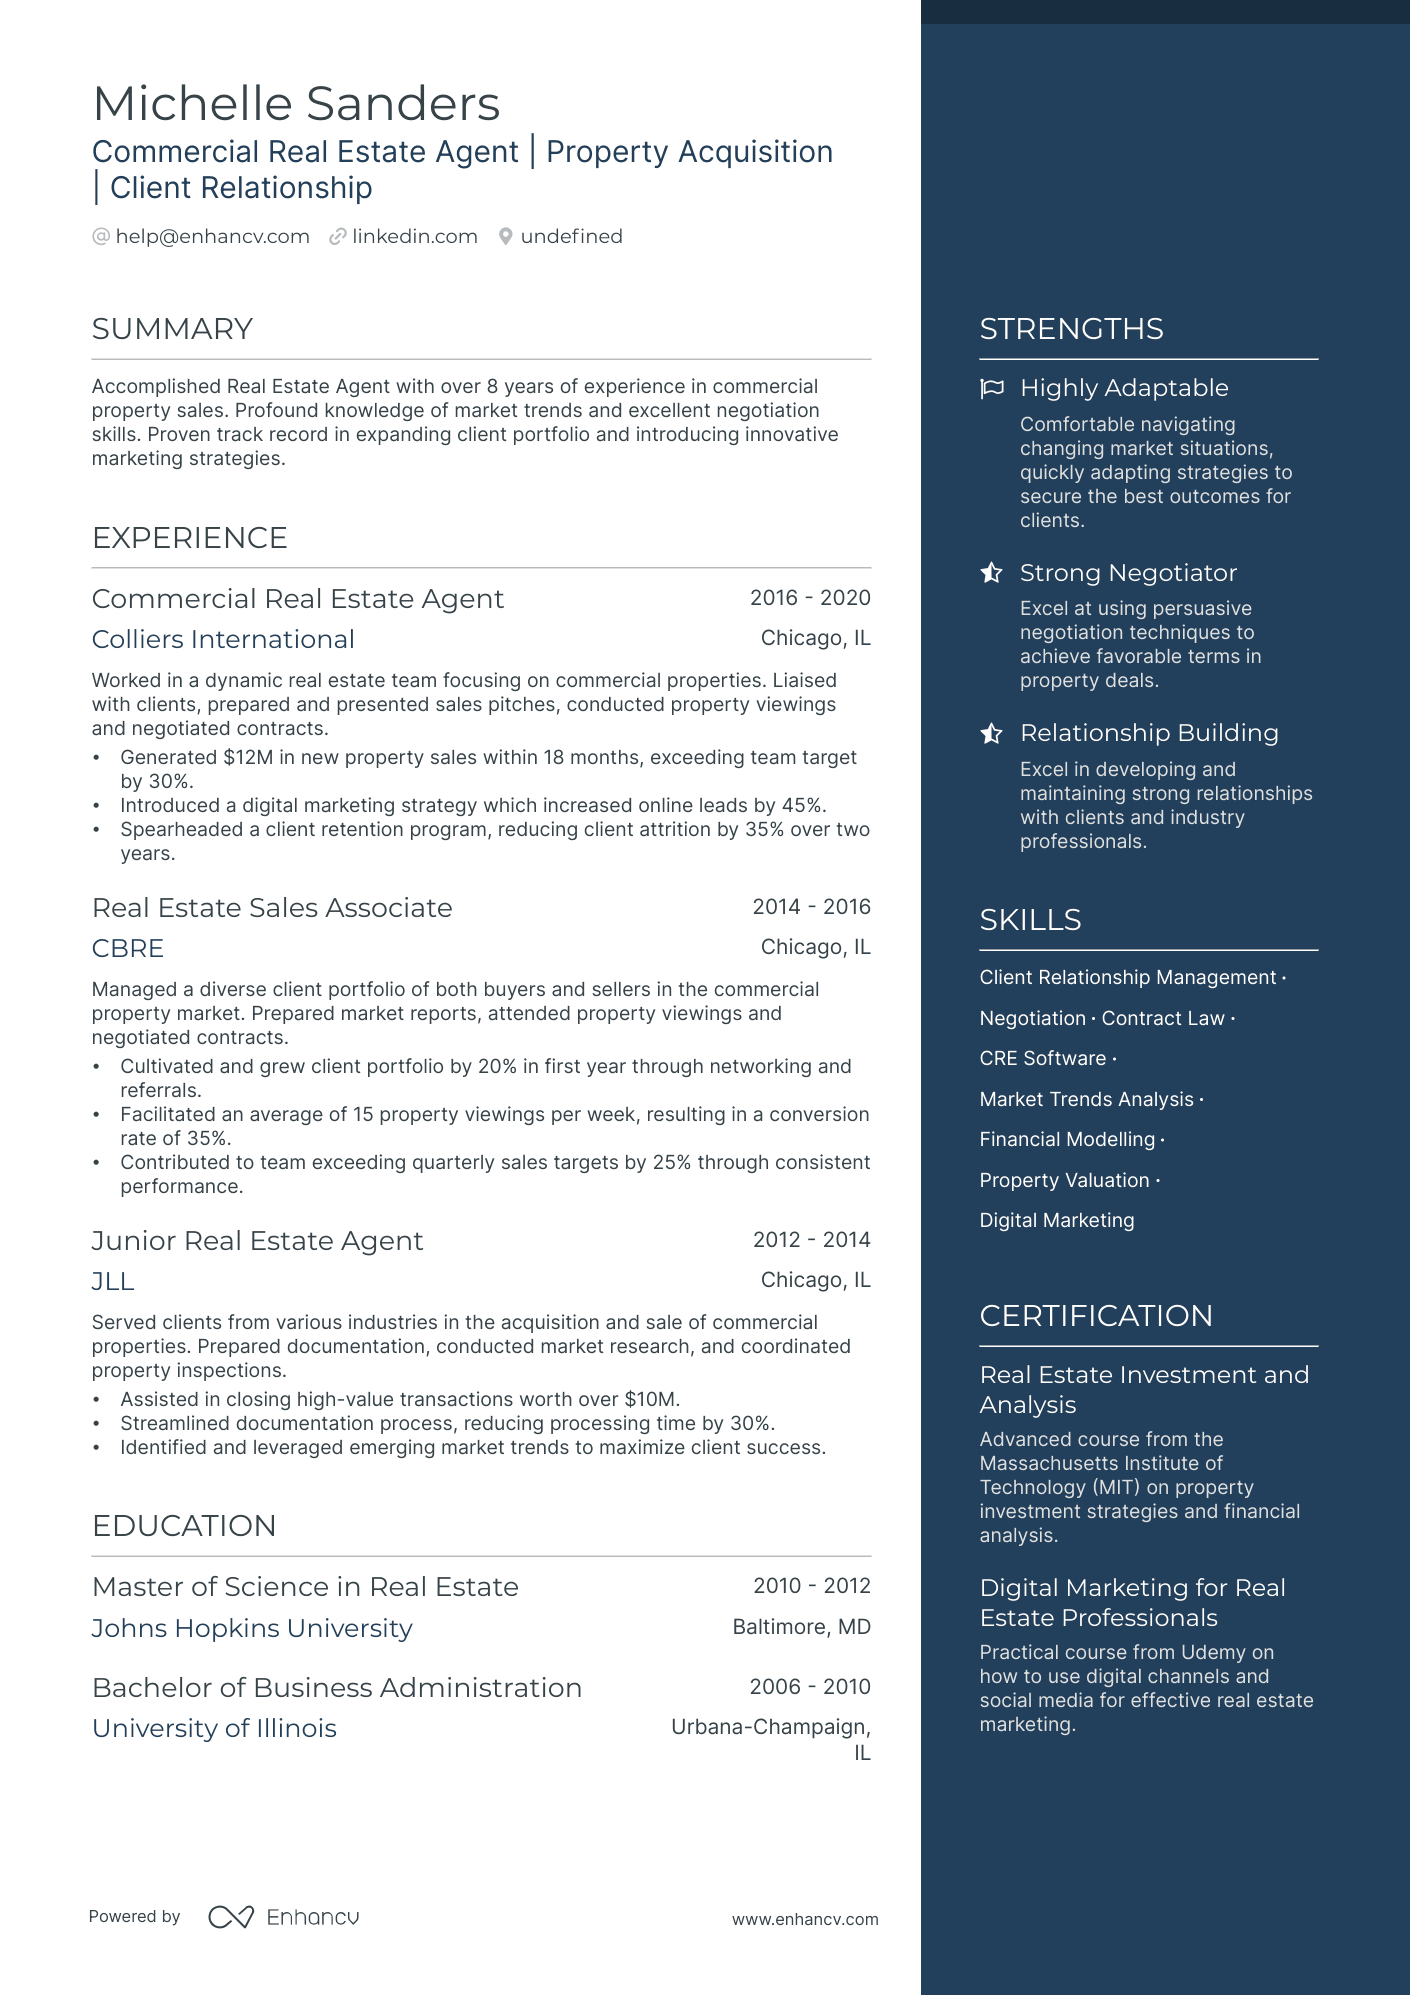 Commercial Real Estate Agent resume example